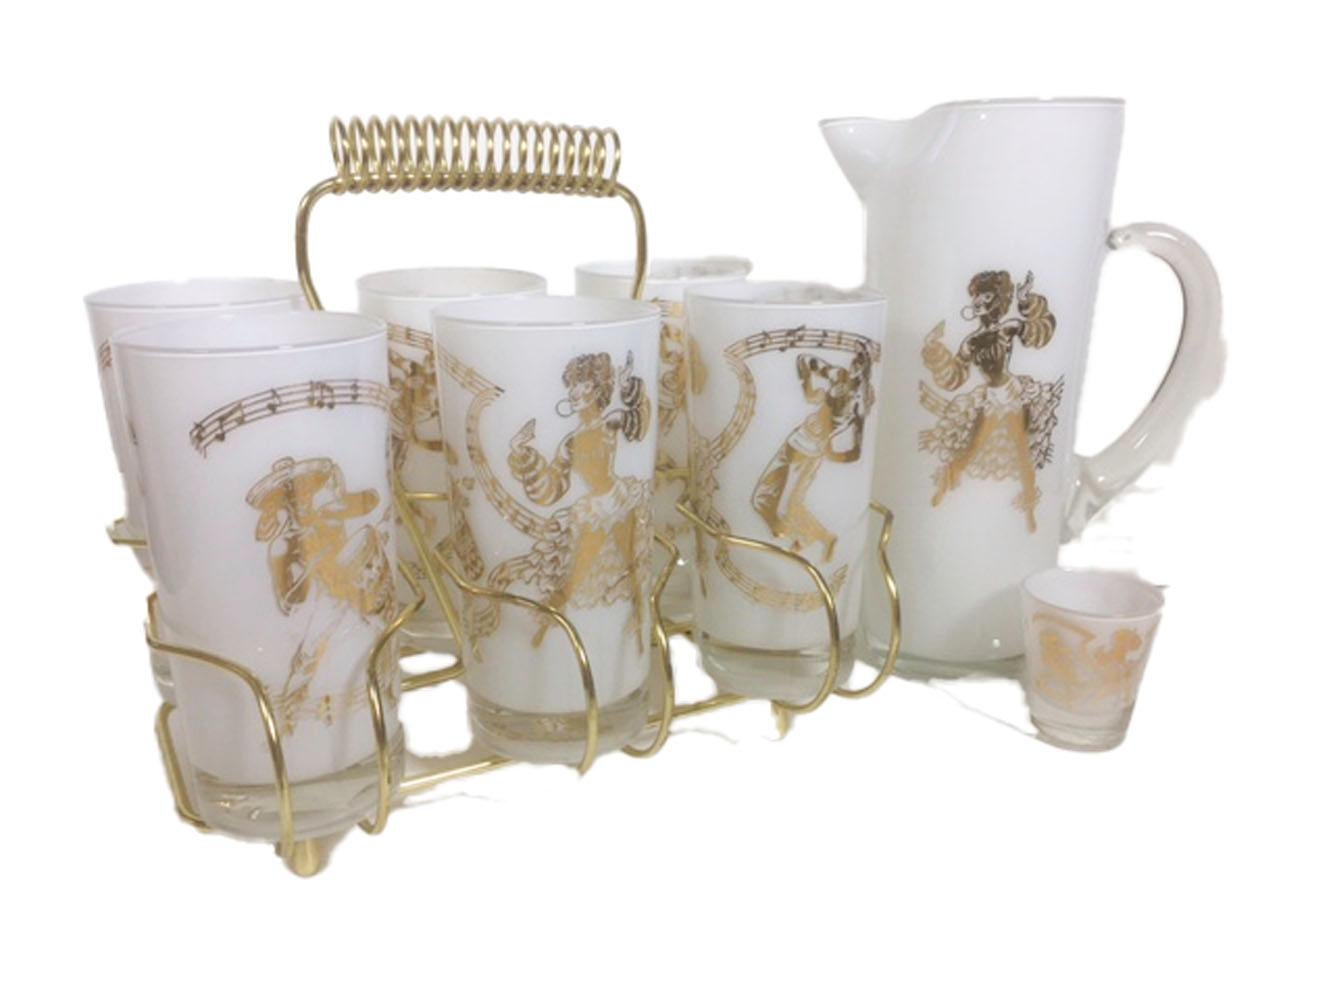 13 Piece Calypso Performer, Cocktail Bar Suite Shaker, Pitcher and Glasses In Good Condition For Sale In Nantucket, MA